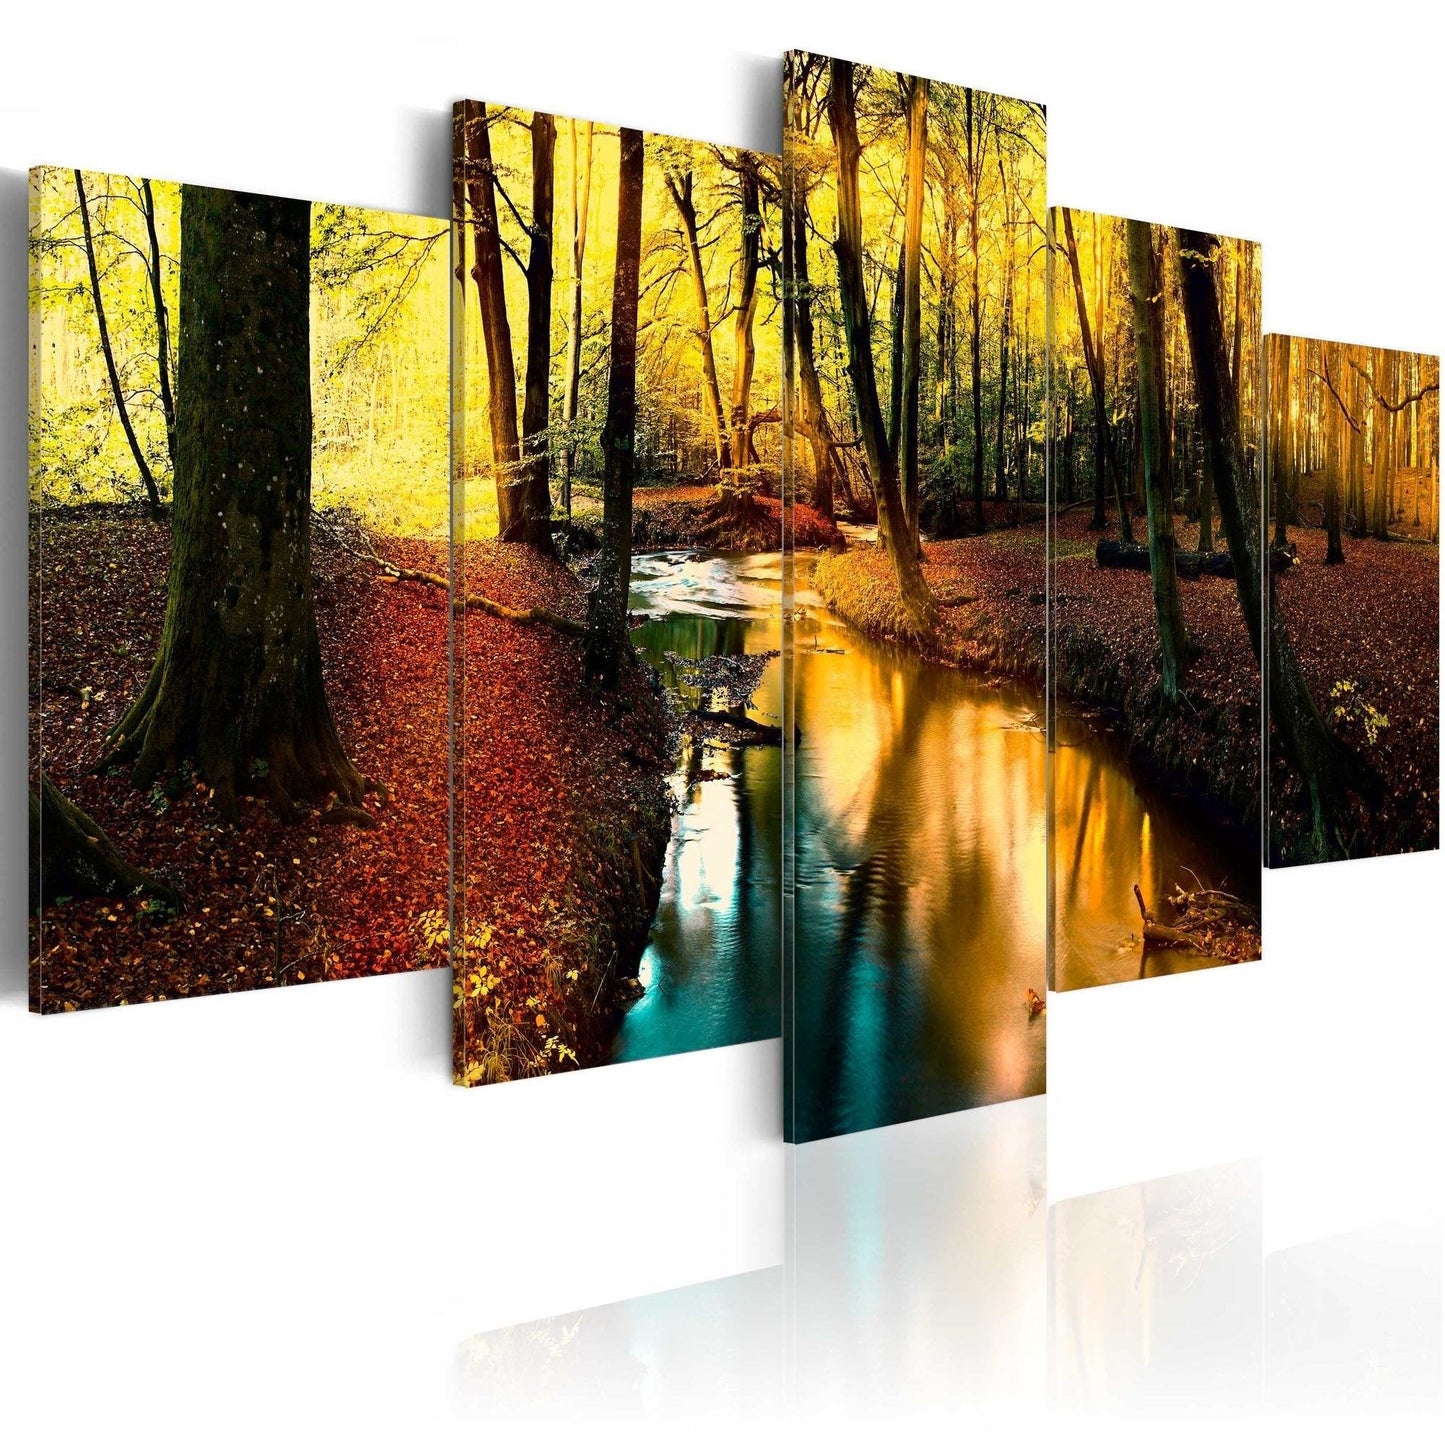 Canvas Print - Autumn silence: forest - www.trendingbestsellers.com